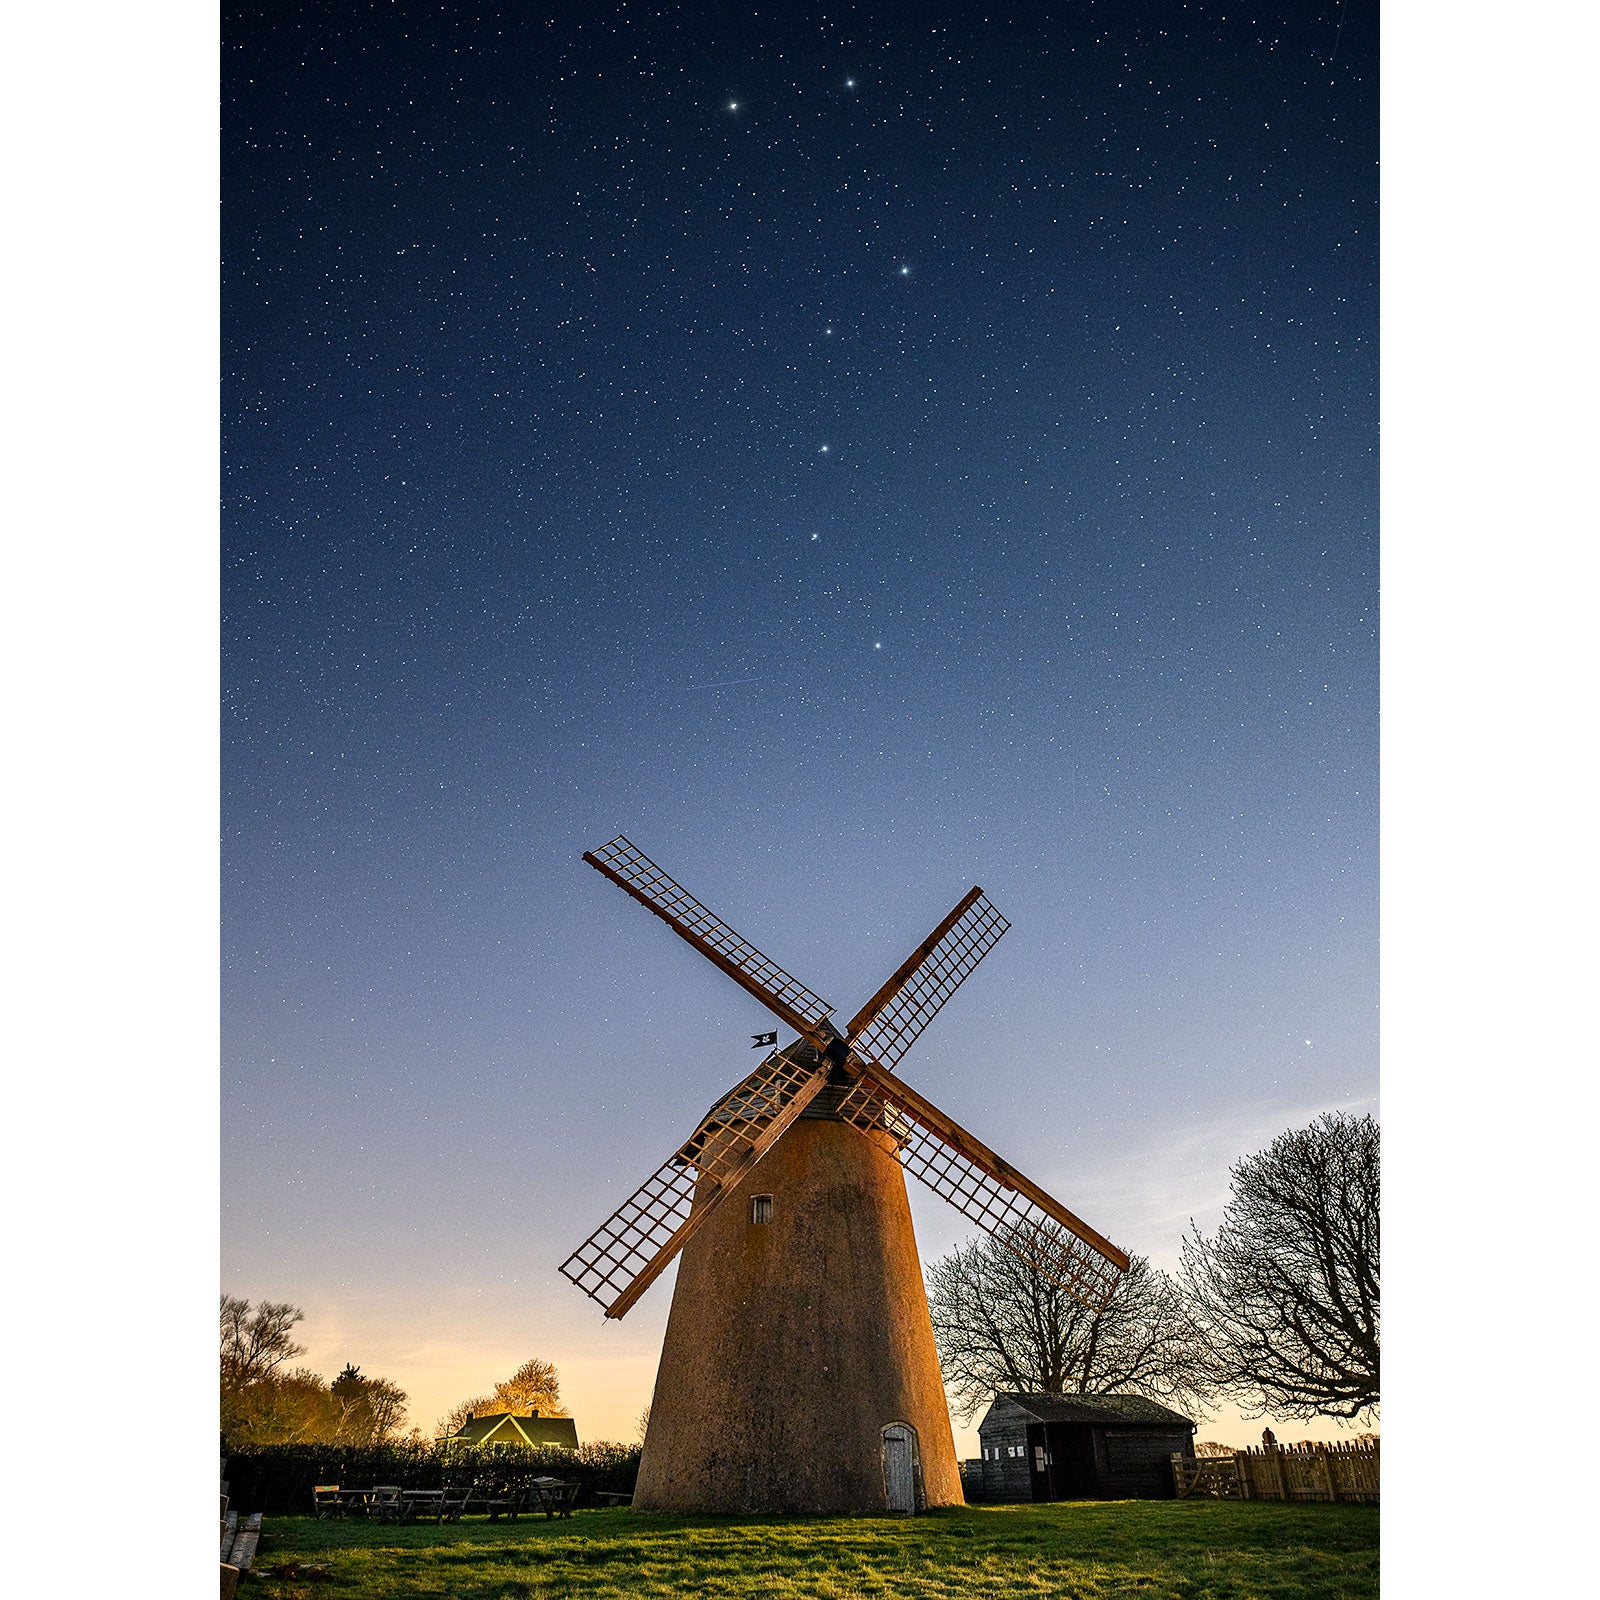 A Bembridge Windmill stands against a starry night sky on the Isle of Wight, captured by Available Light Photography.